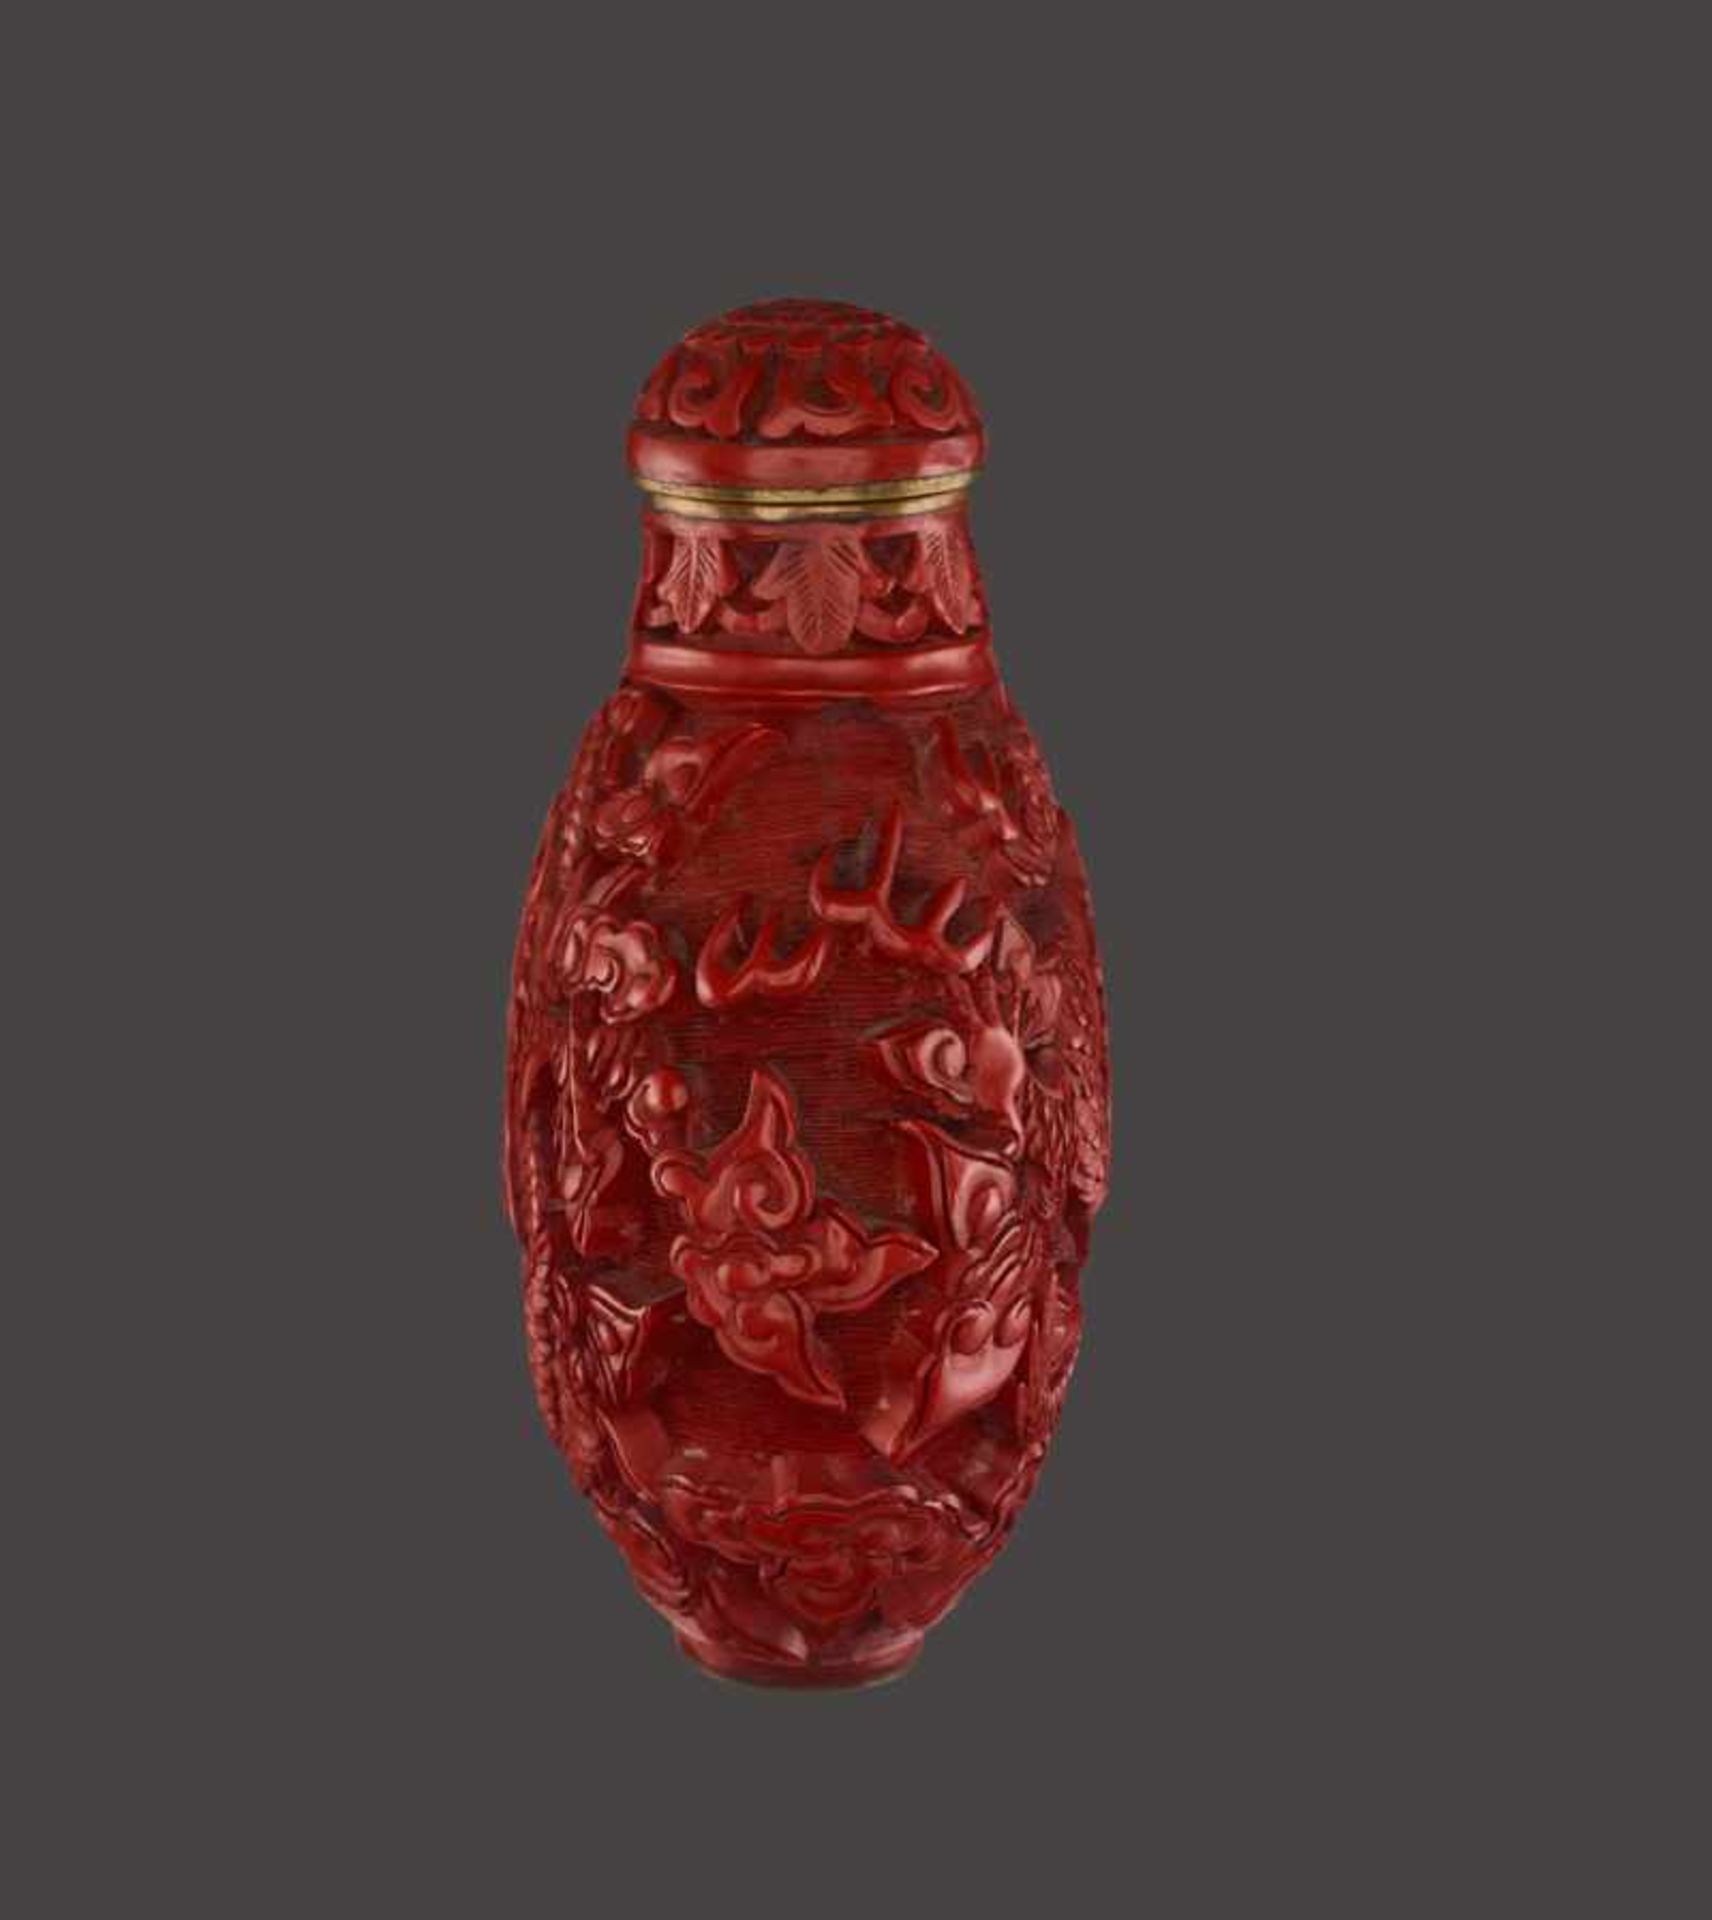 A CINNABAR LACQUER ‘DRAGON’ SNUFF BOTTLE Cinnabar lacquer in high relief on bronze body. China, late - Image 4 of 6